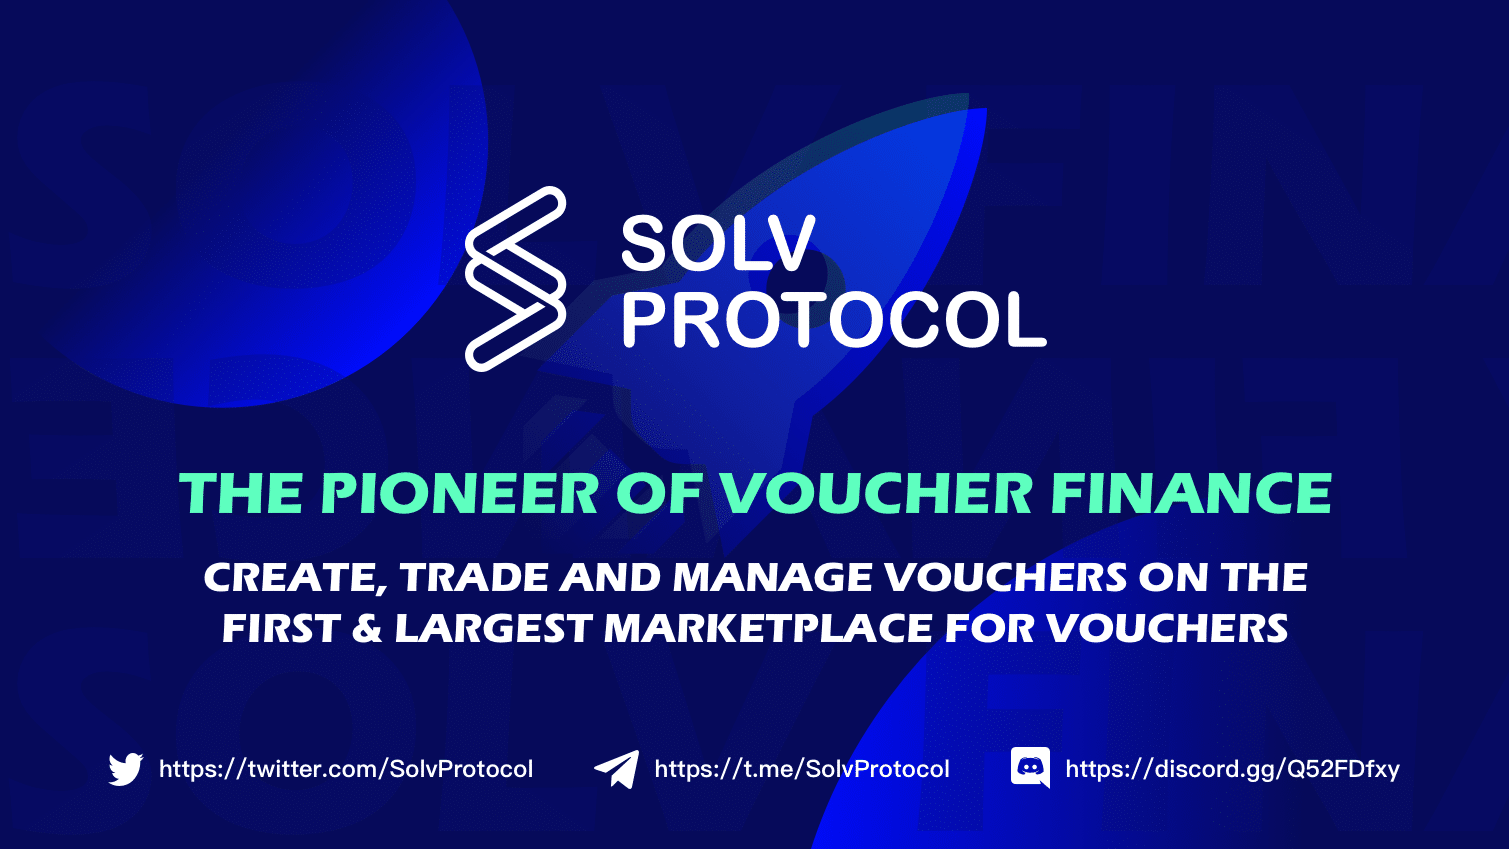 Solv Protocol to Bring Voucher Finance to DeFi As It Concludes Series A Round with $4 Million Raise - 1